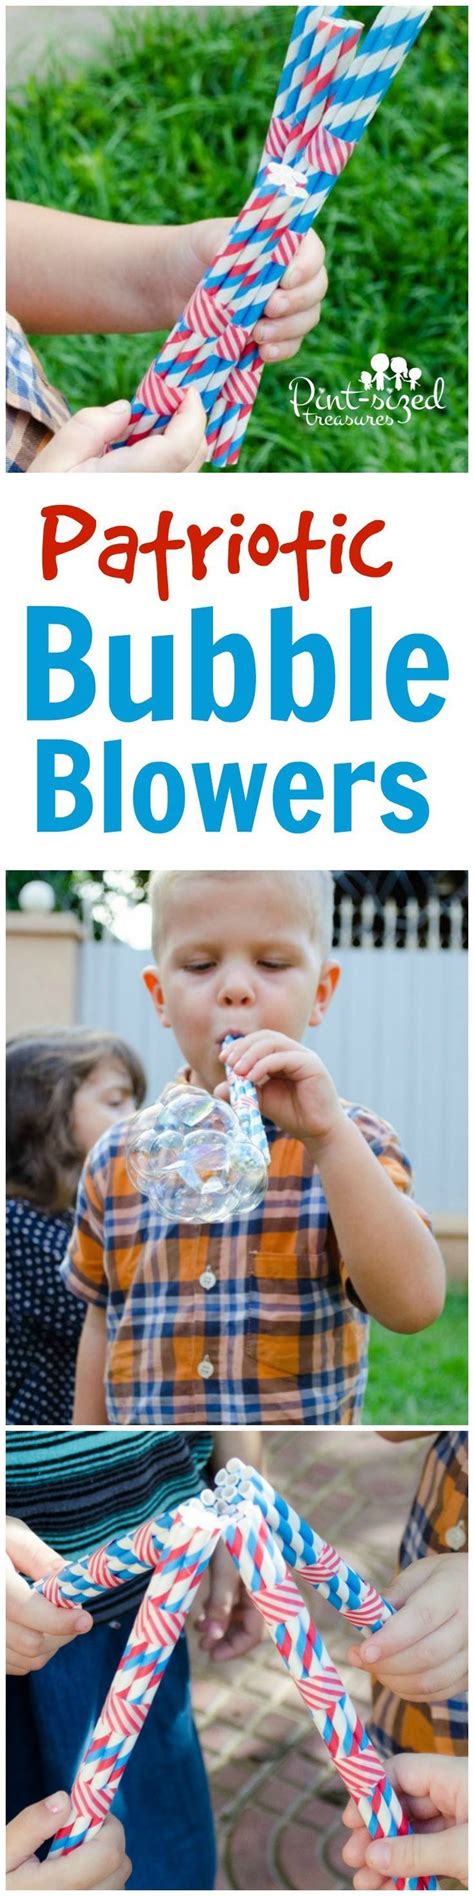 Patriotic Bubble Blowers Are Super Fun For Kids To Make Themselves